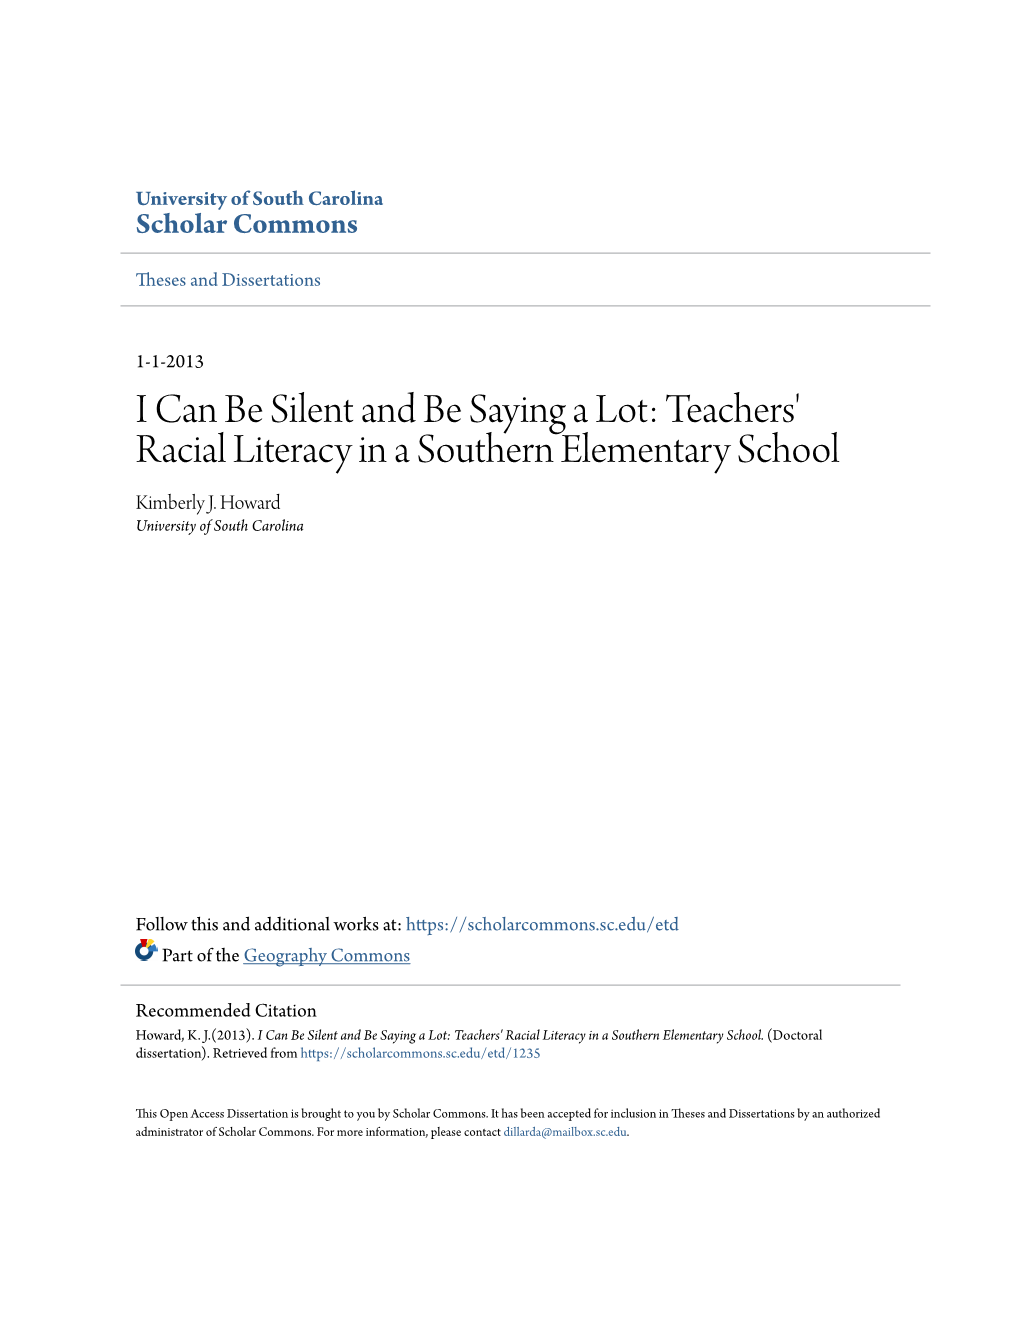 I Can Be Silent and Be Saying a Lot: Teachers' Racial Literacy in a Southern Elementary School Kimberly J